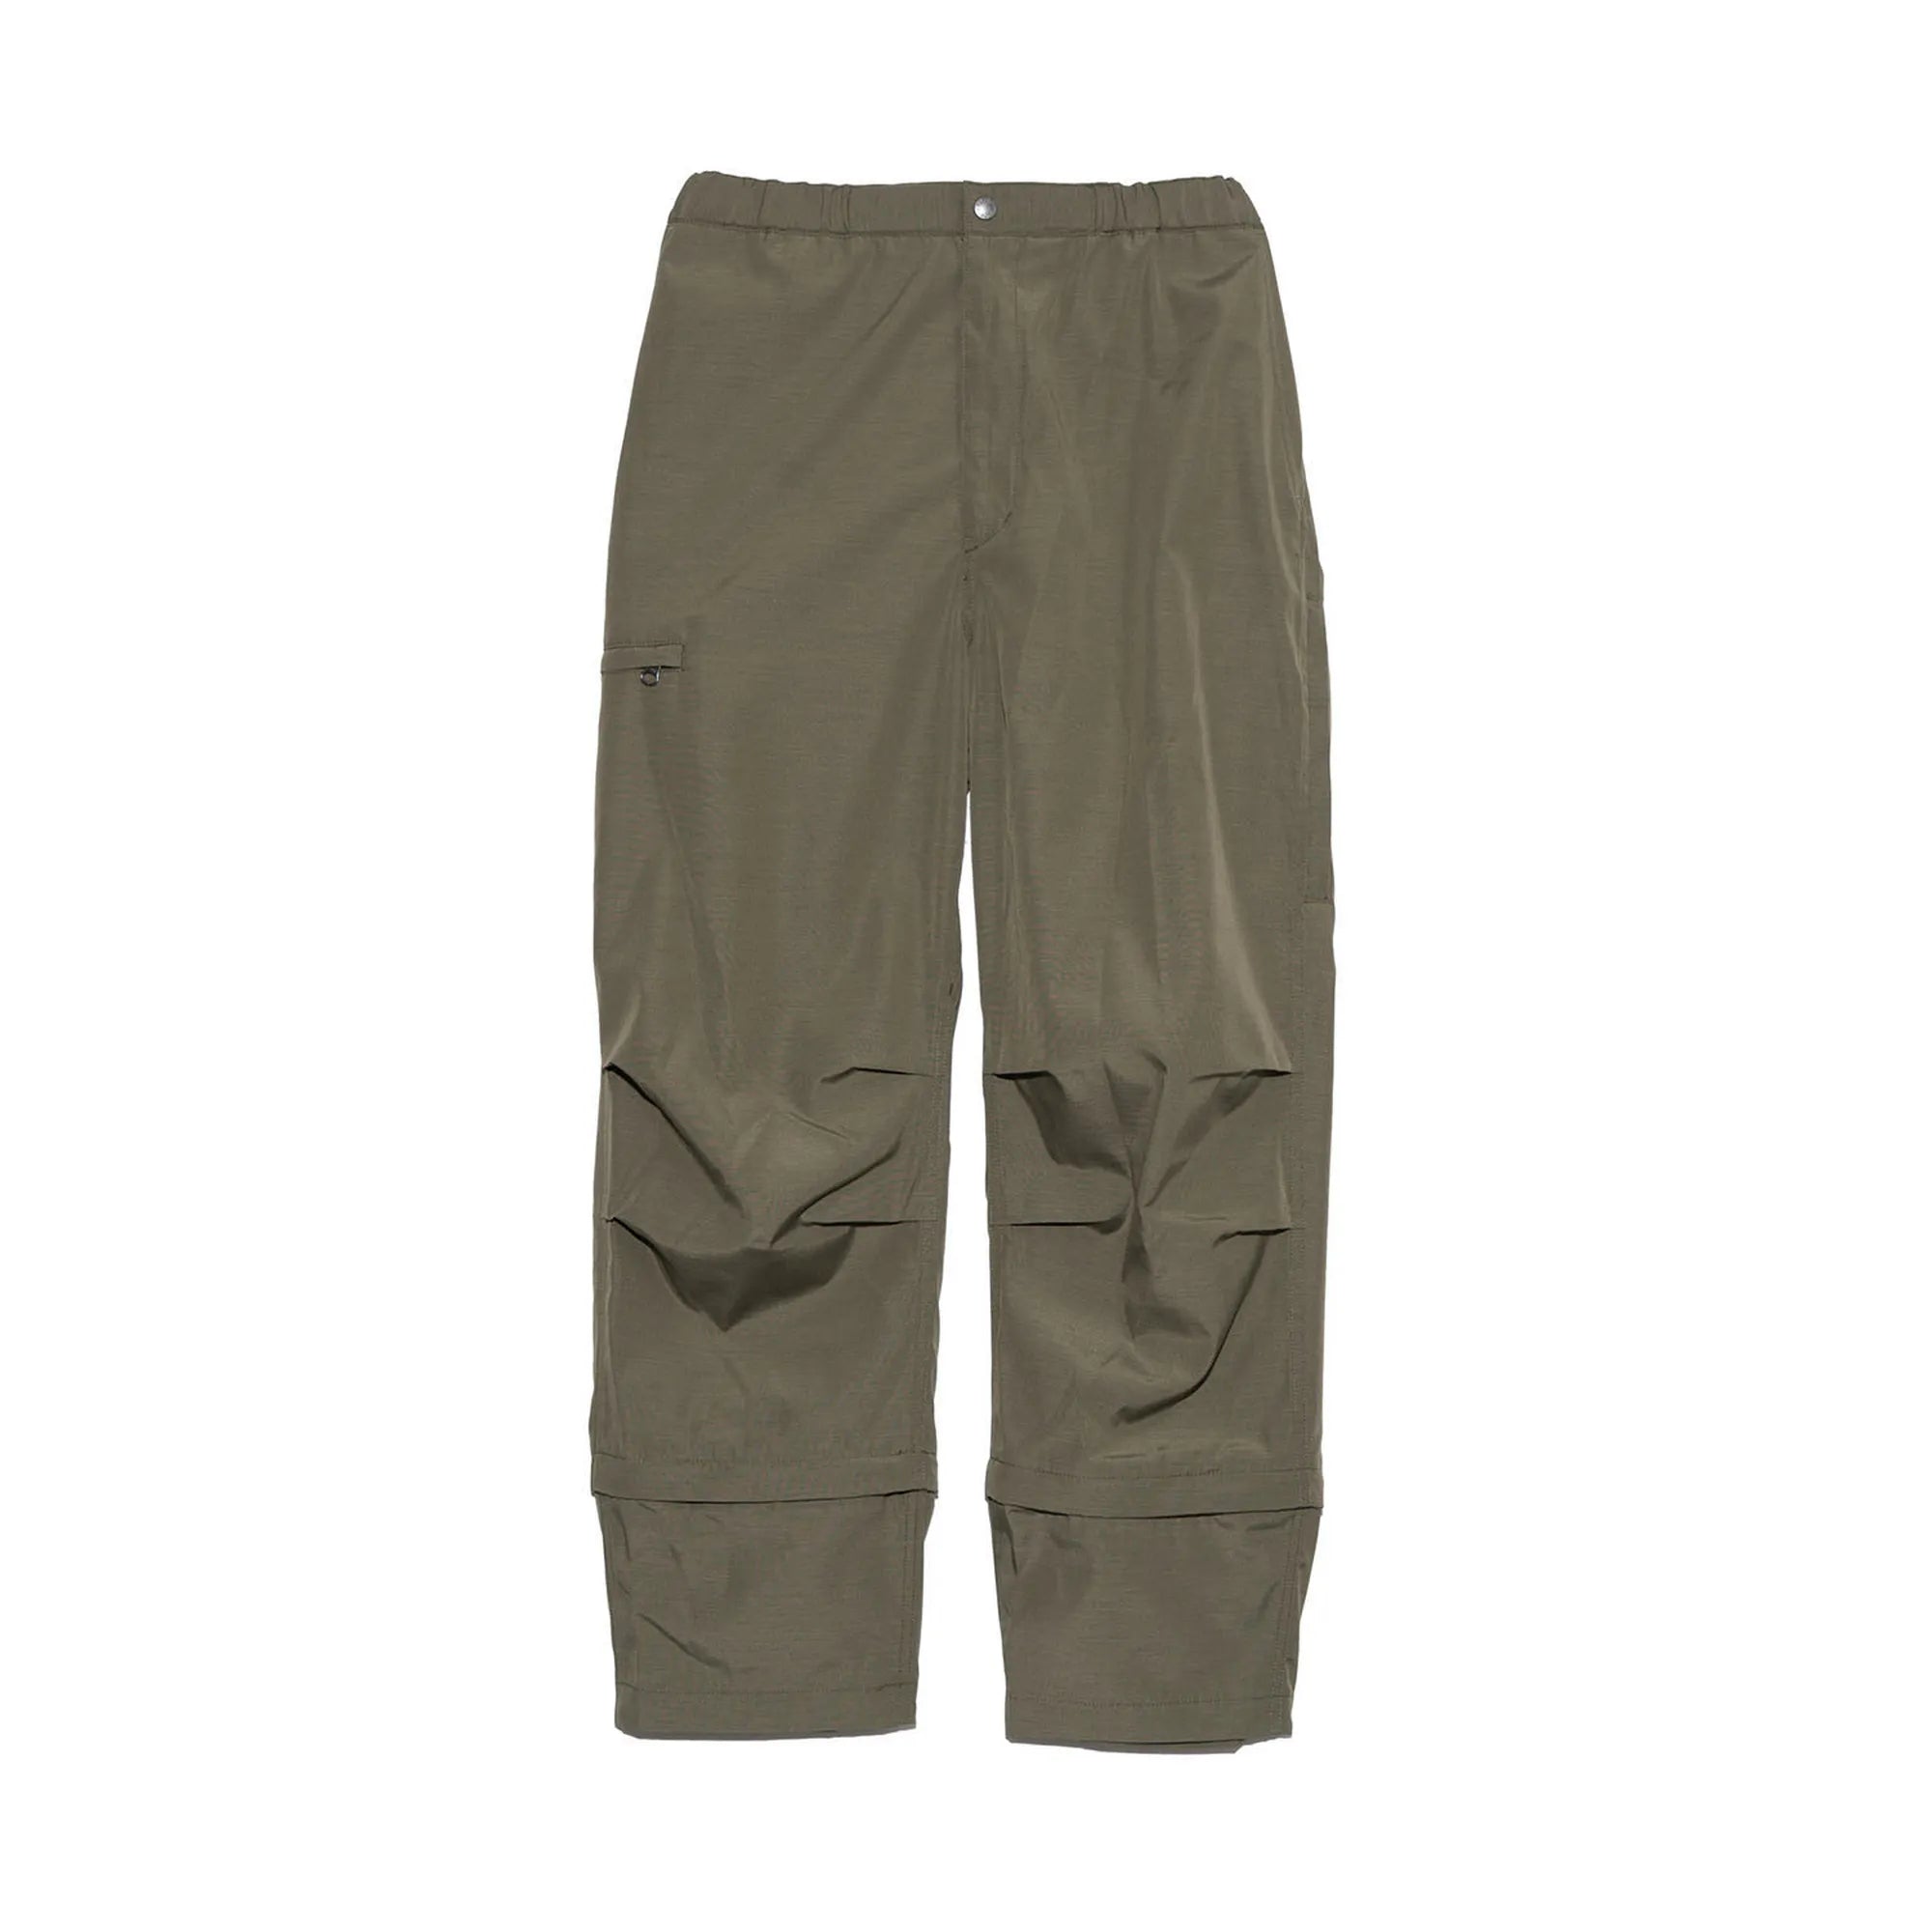 THE NORTH FACE PURPLE LABEL / MOUNTAIN WIND PANTS